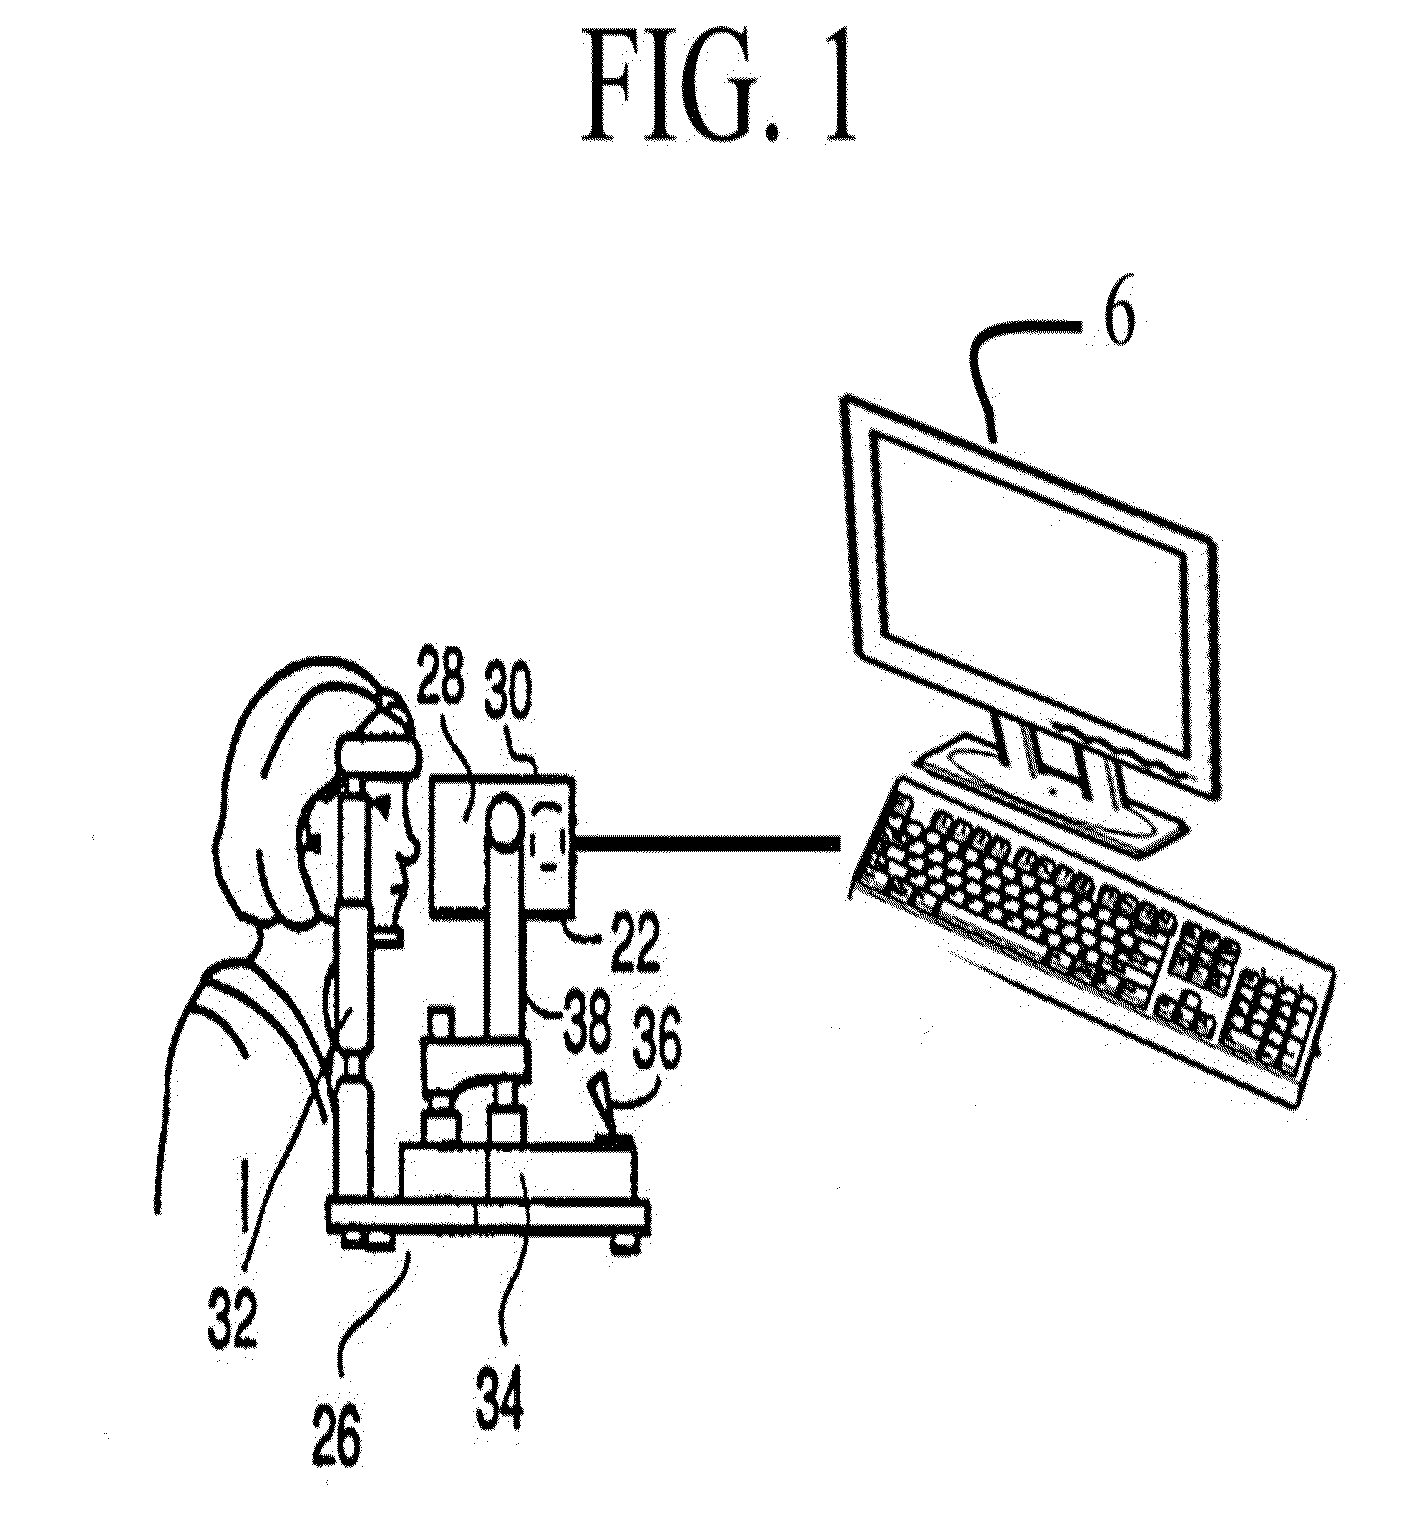 Apparatus and method for imaging the eye